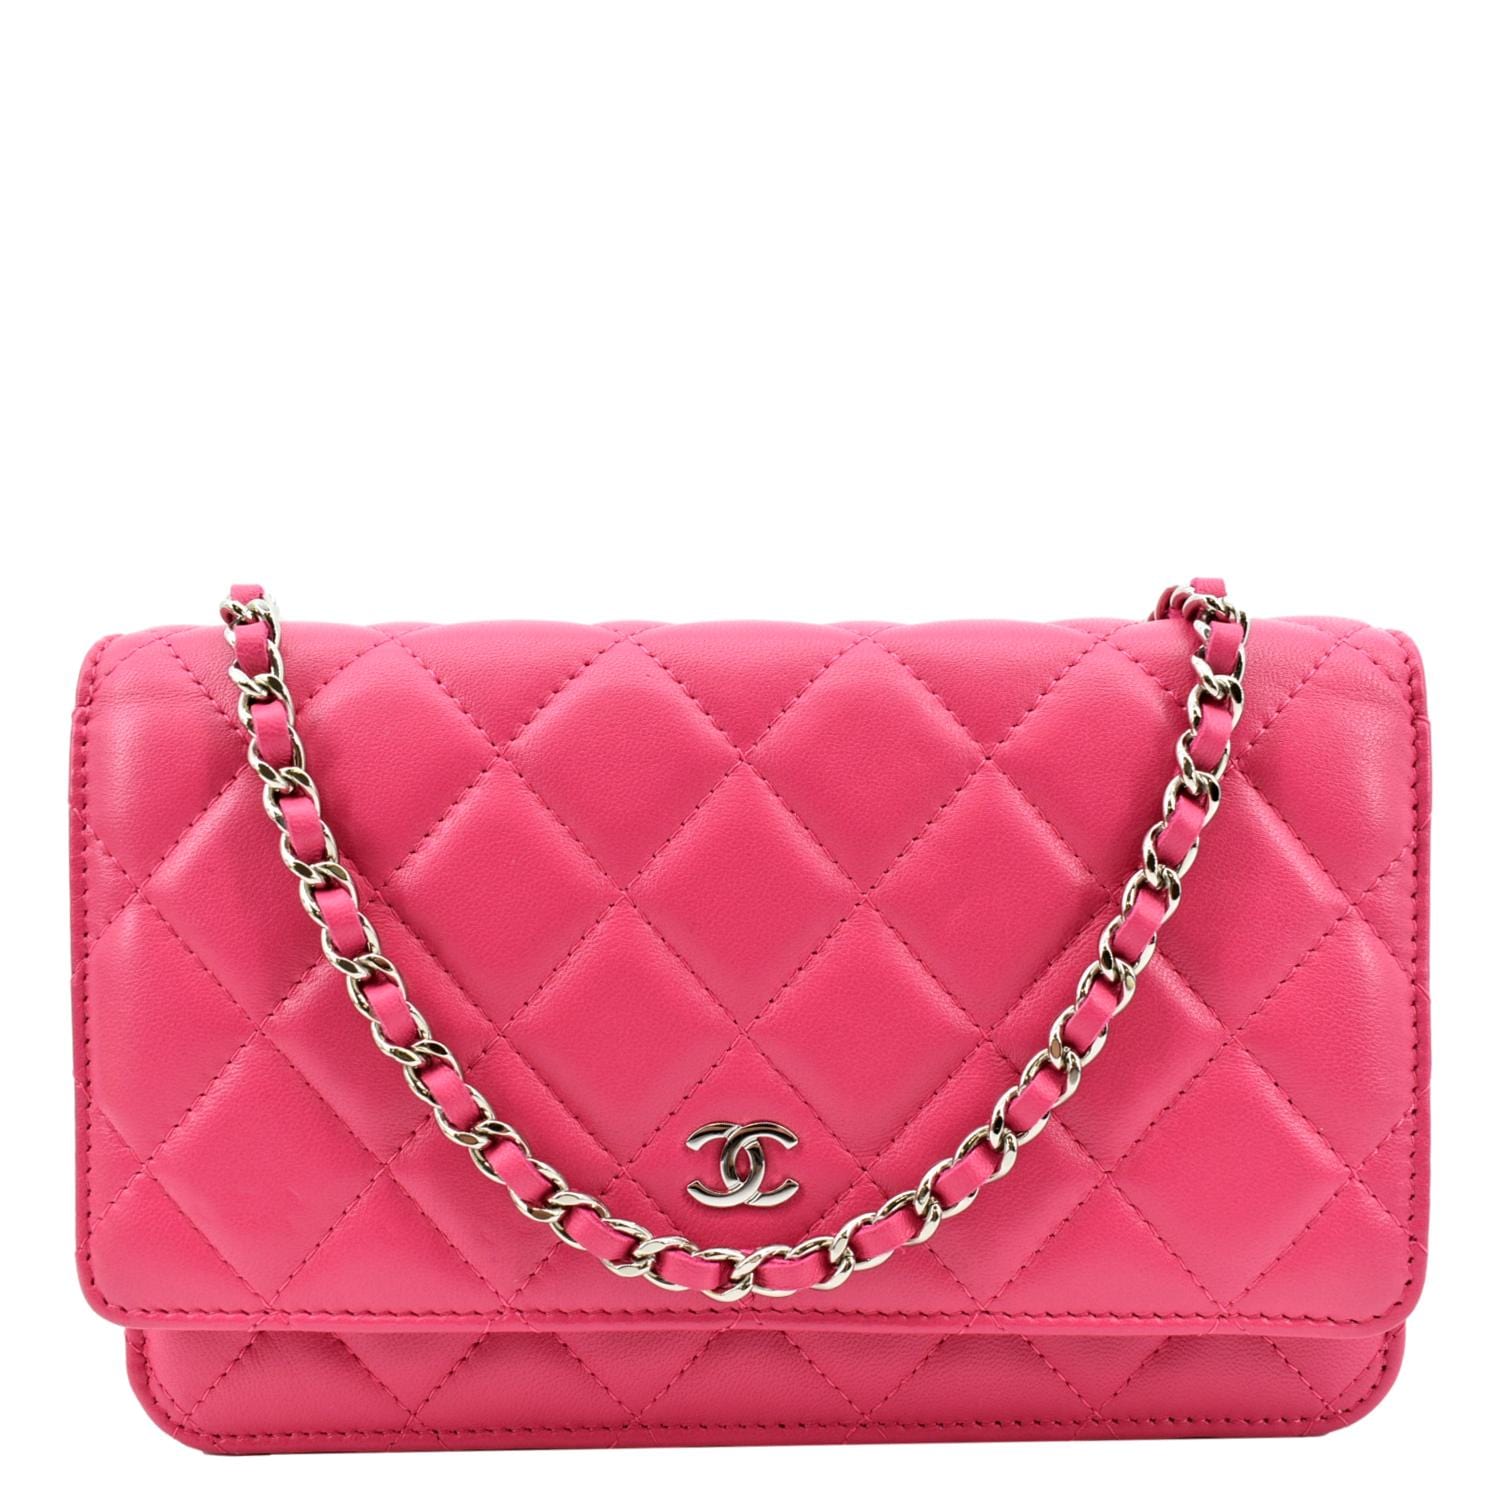 CHANEL Women's Pre-Loved Half Flap Woc, Lambskin Quilted